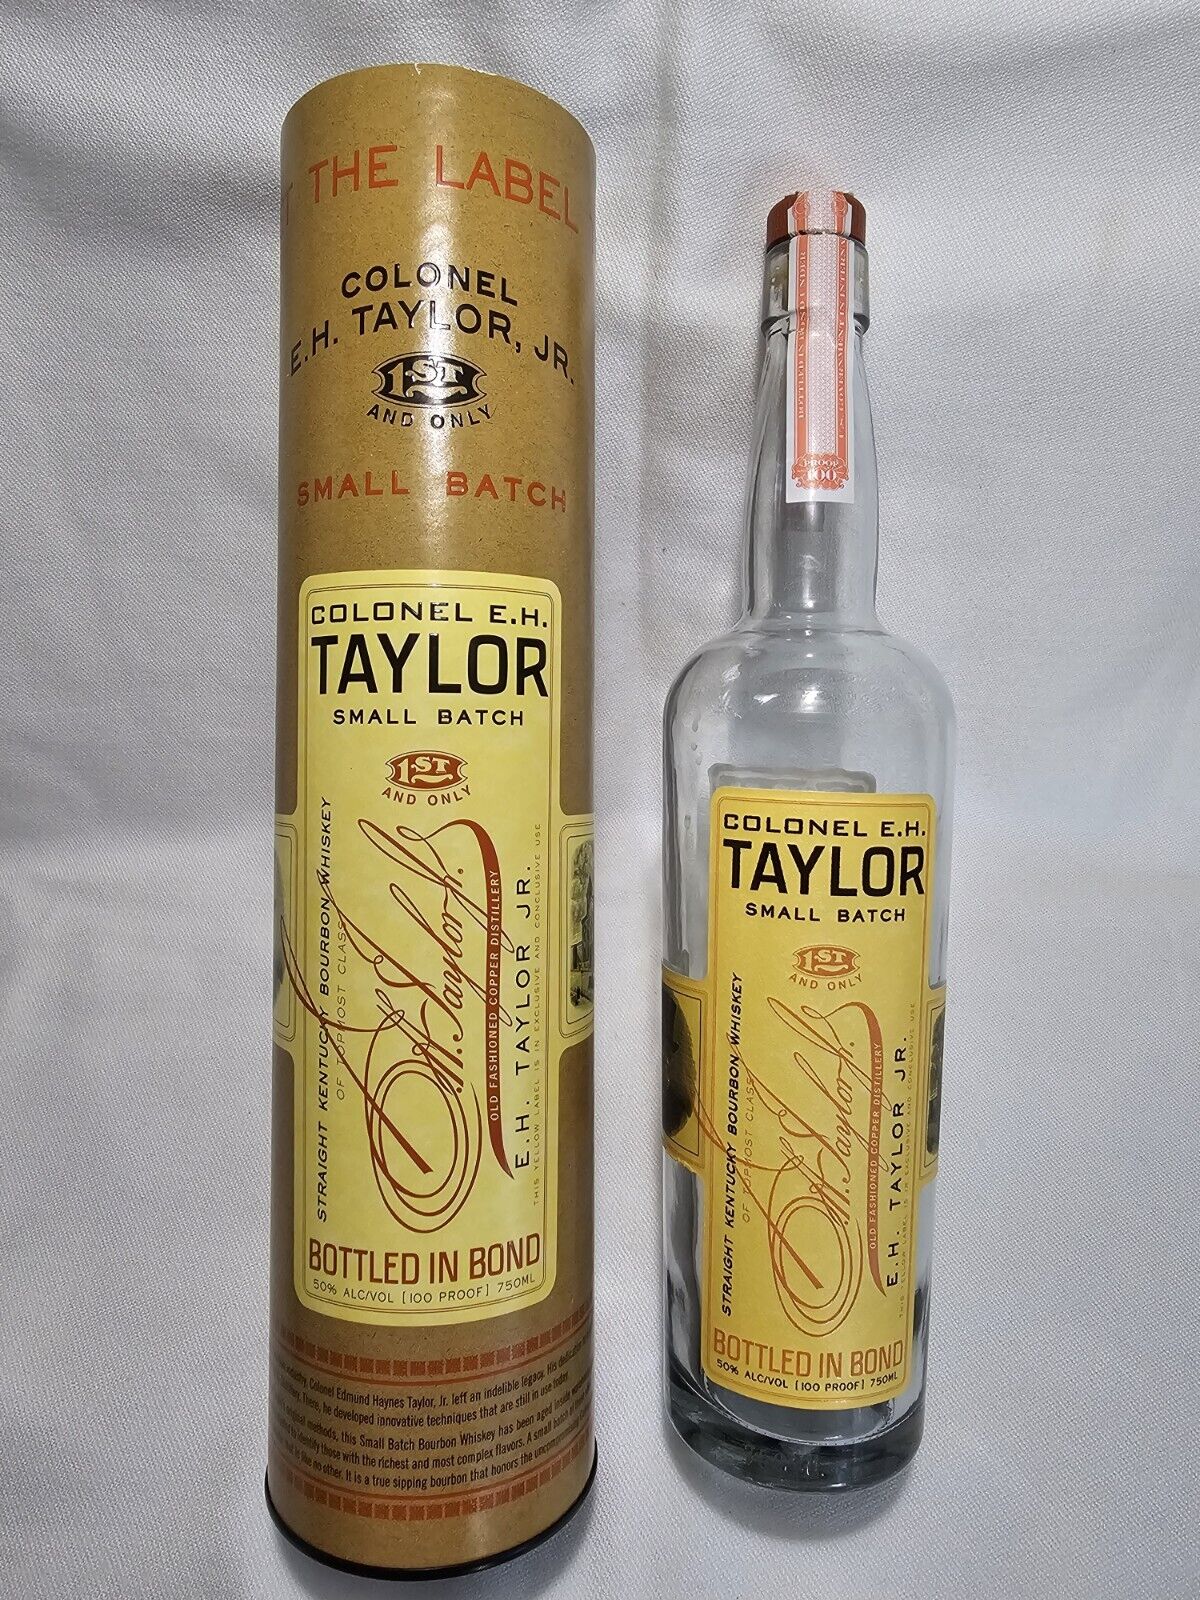 Colonel EH Taylor Small Batch Bourbon Whiskey Empty 750ml Bottle, Cork, and Tube